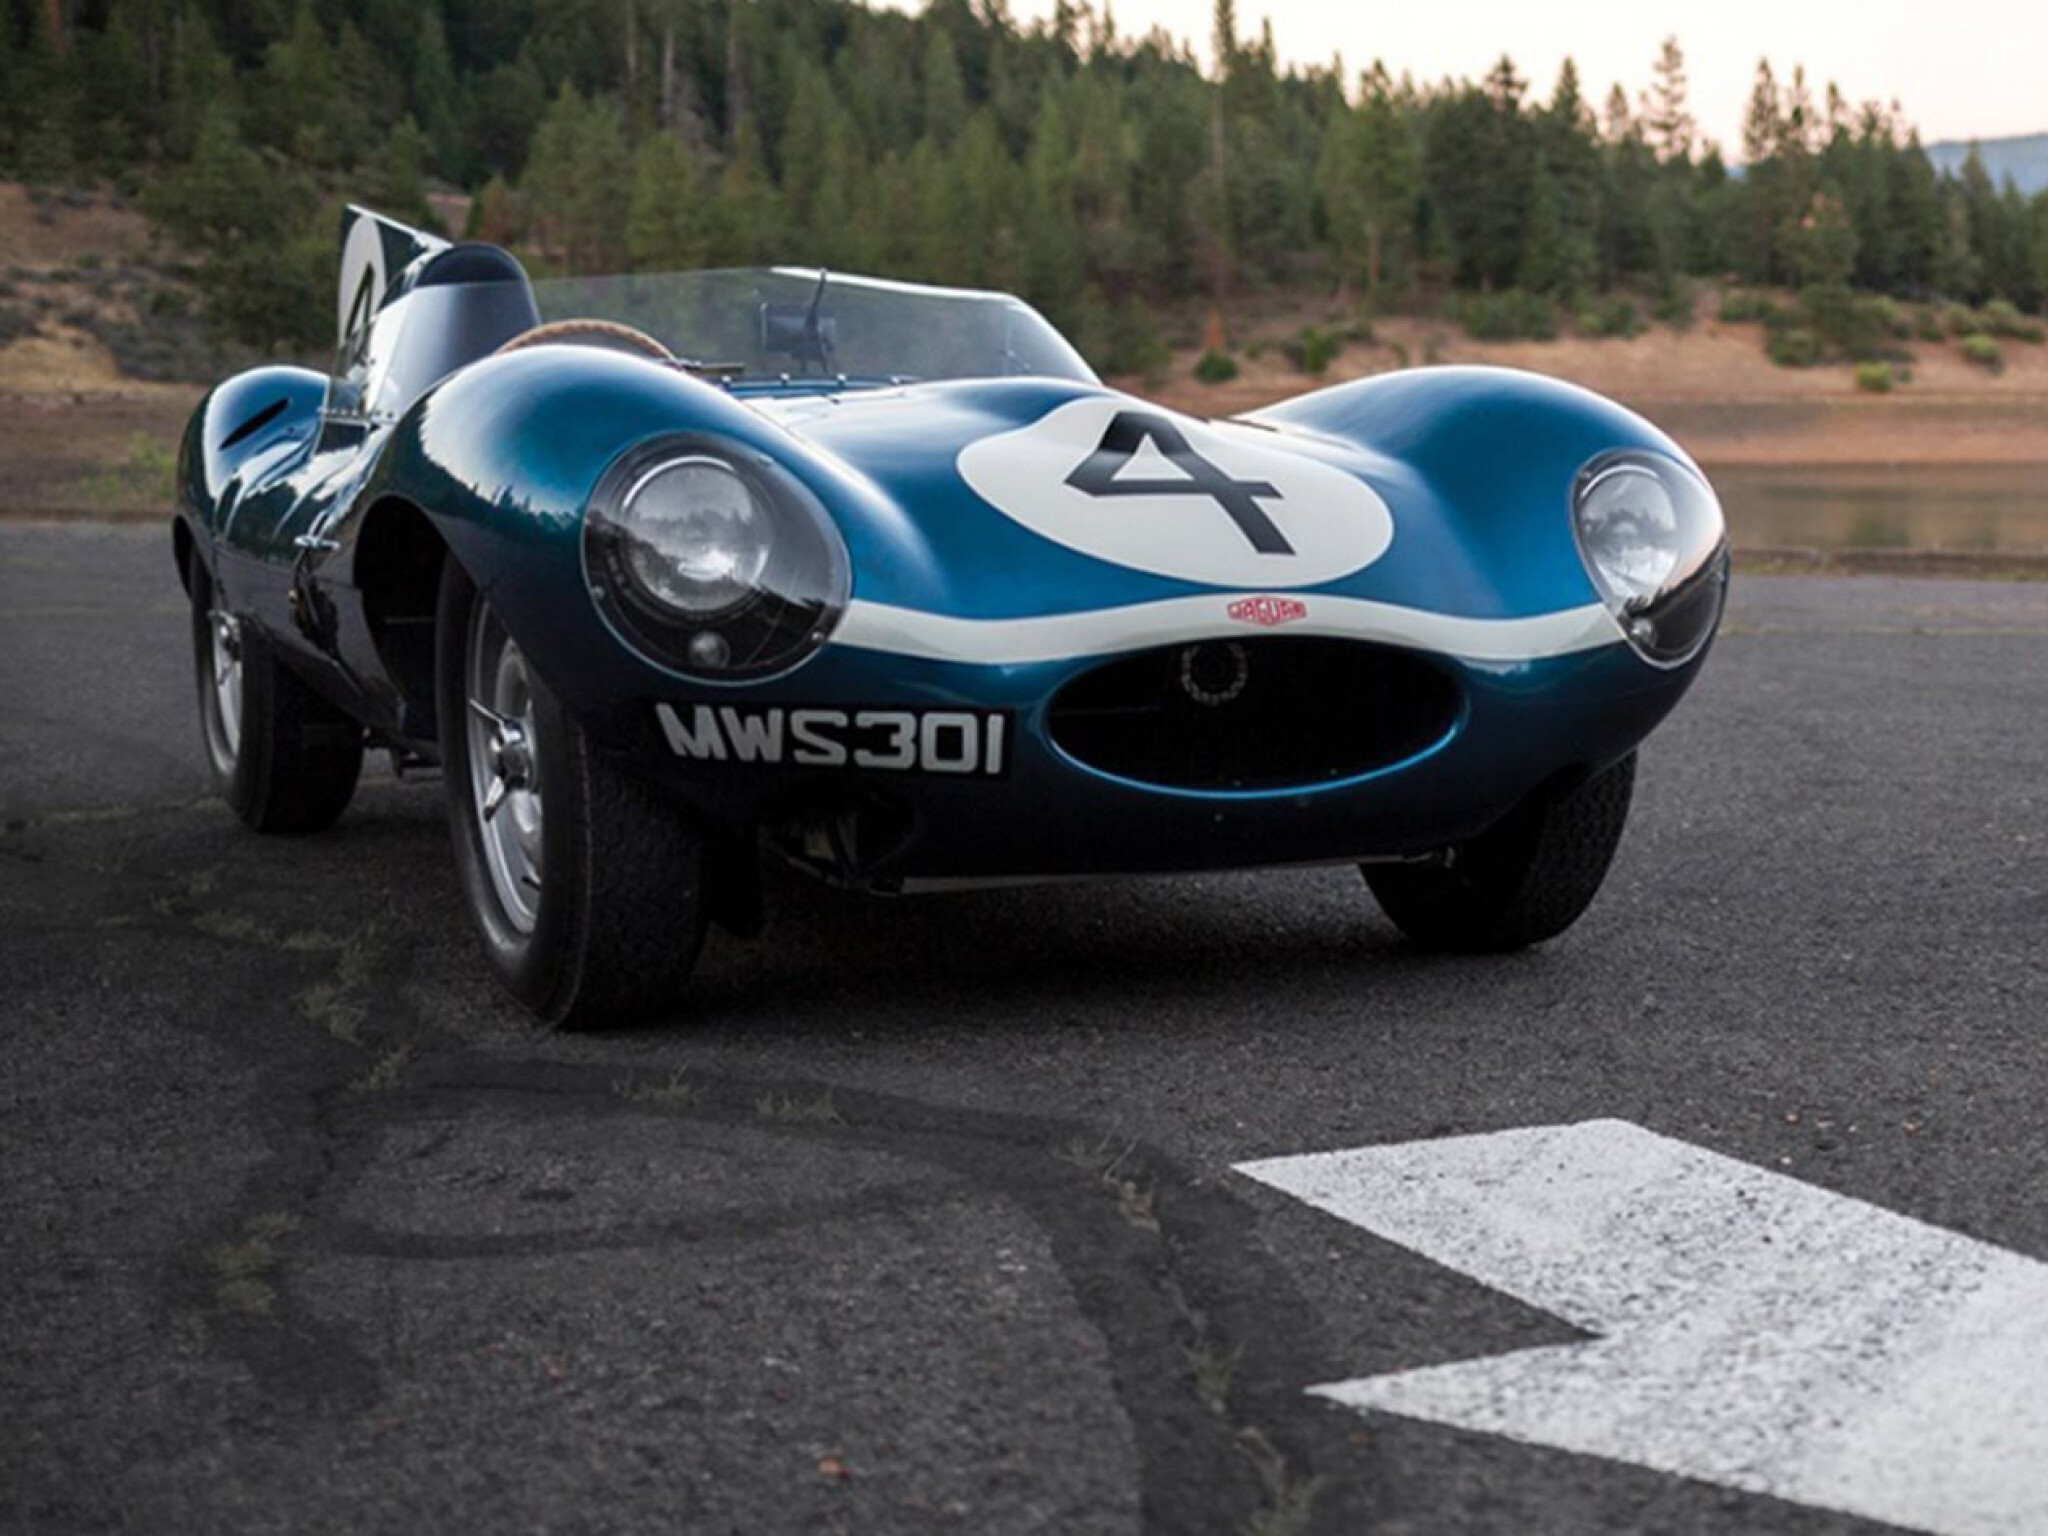 Jaguar D-Type sells for staggering $28m, breaks record